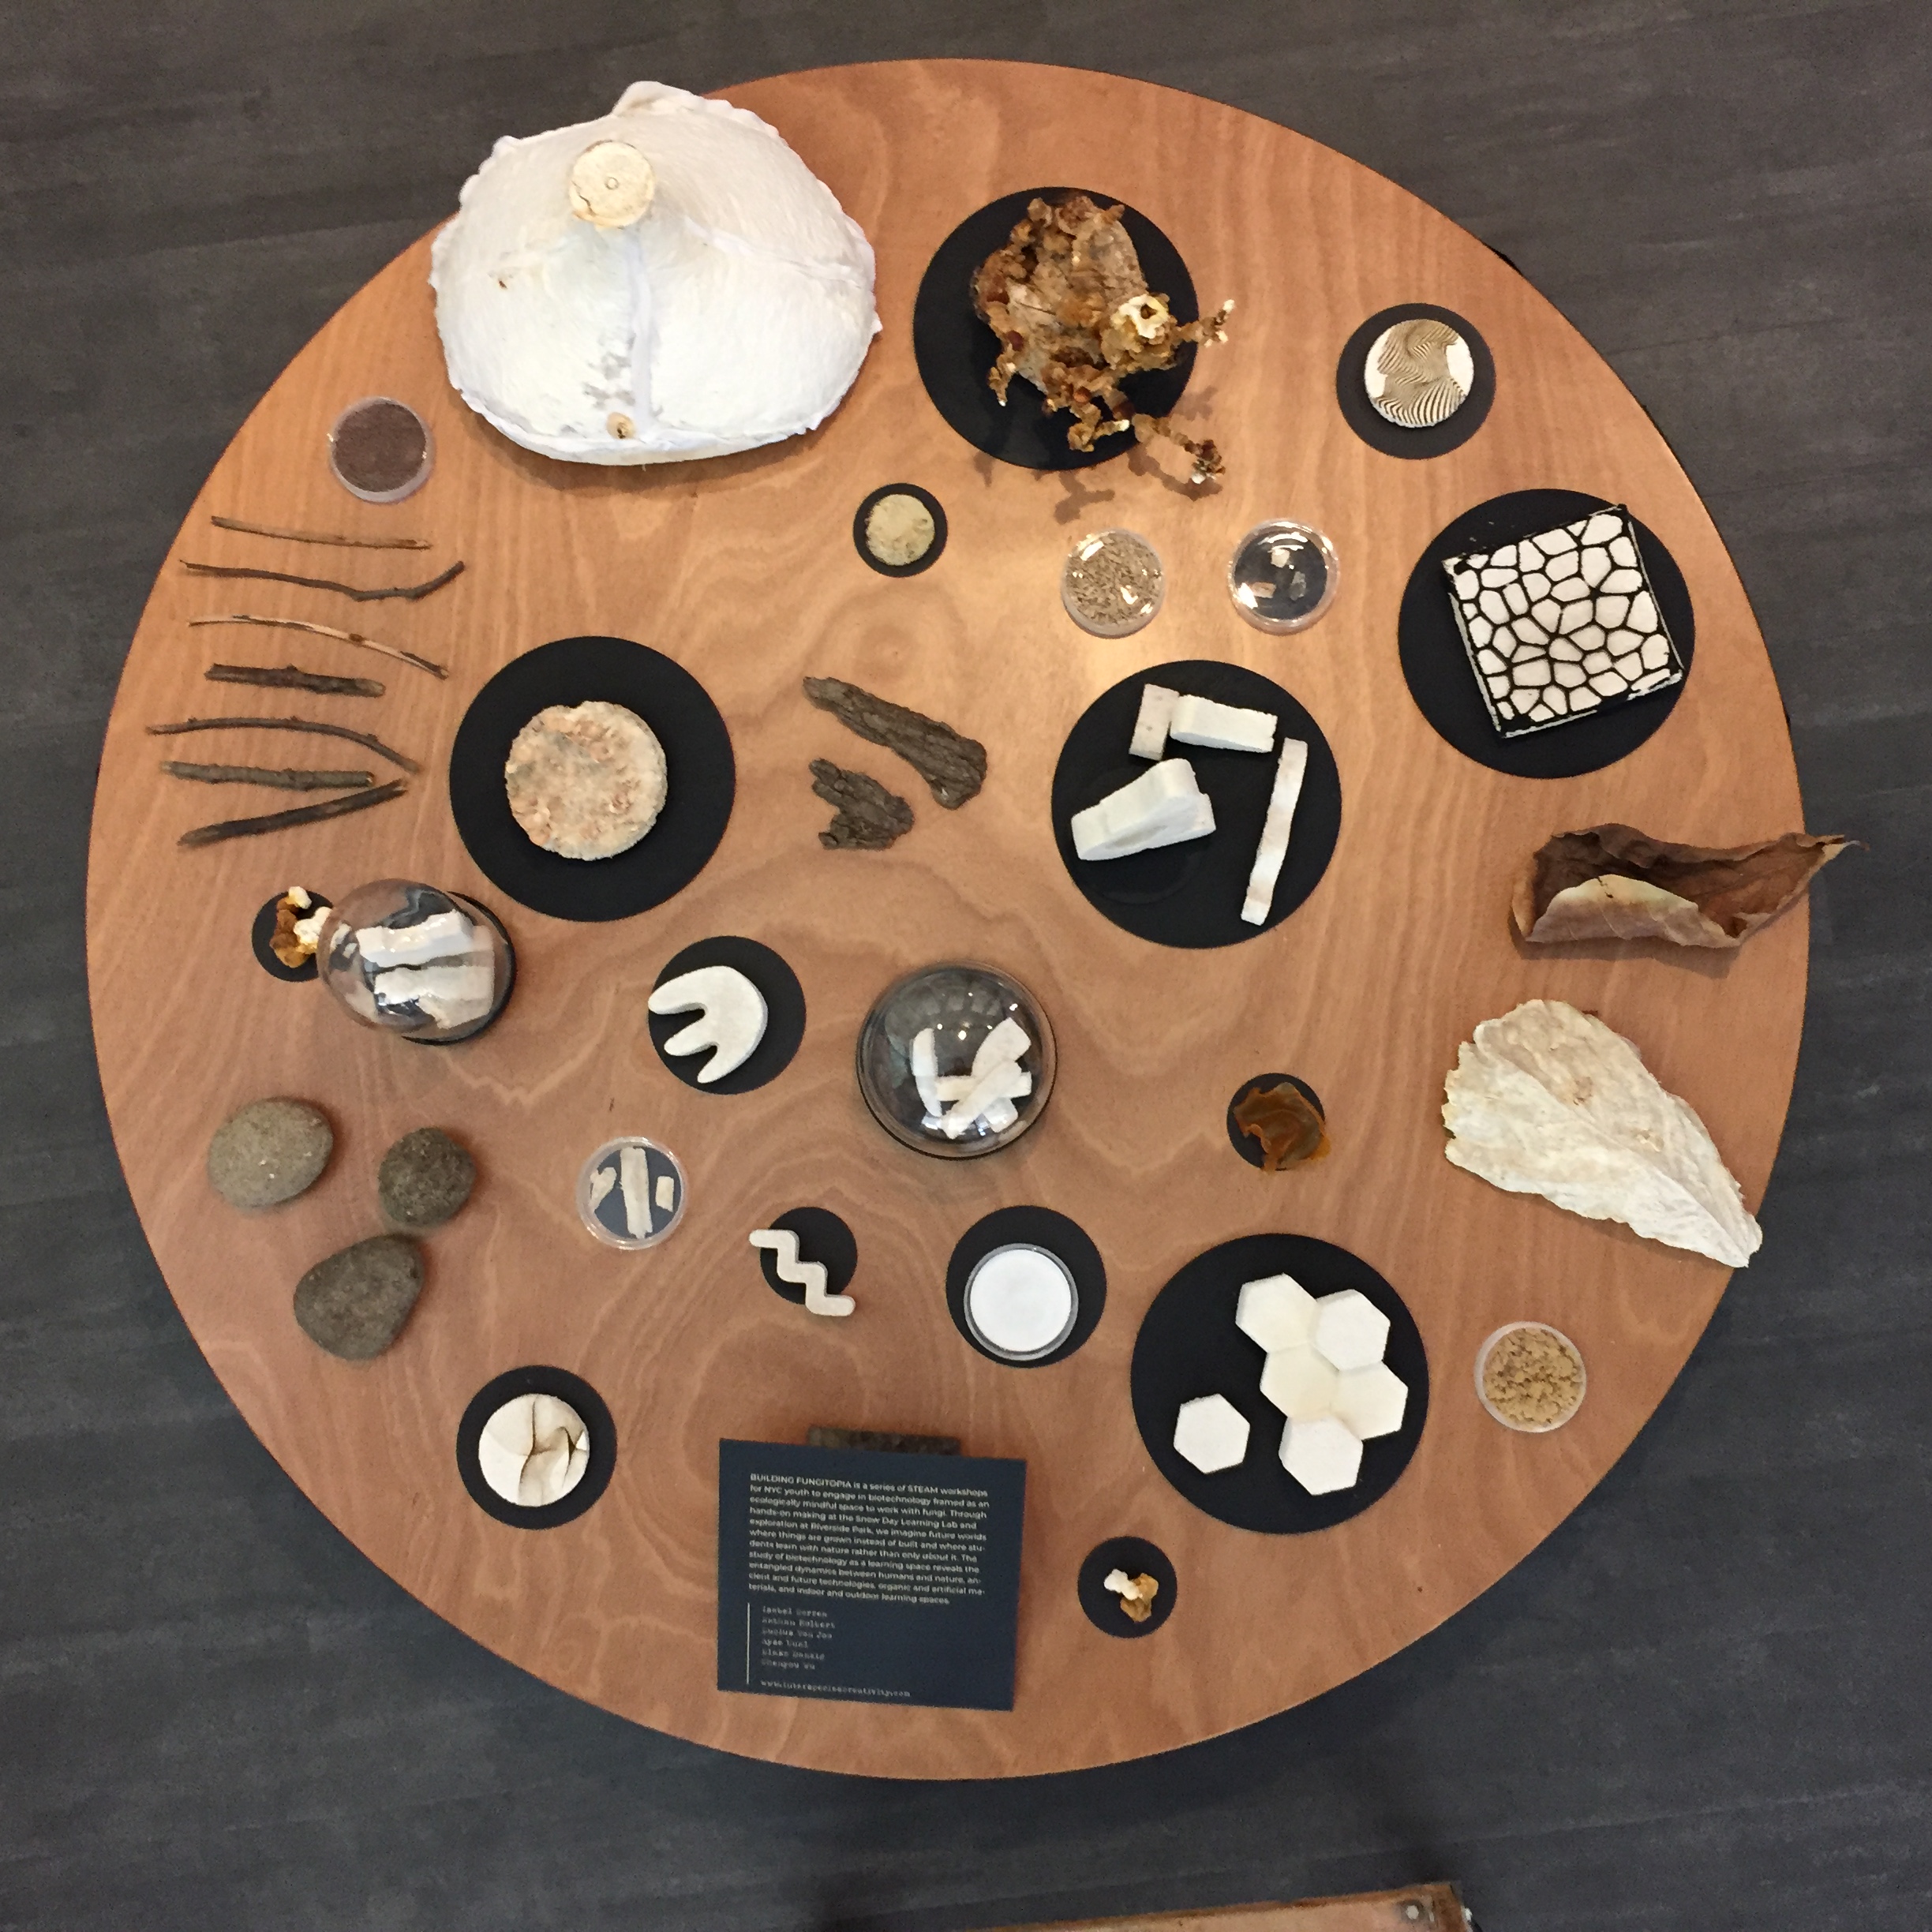 bird's eye view of circle table with mycelium and mushroom sculptures